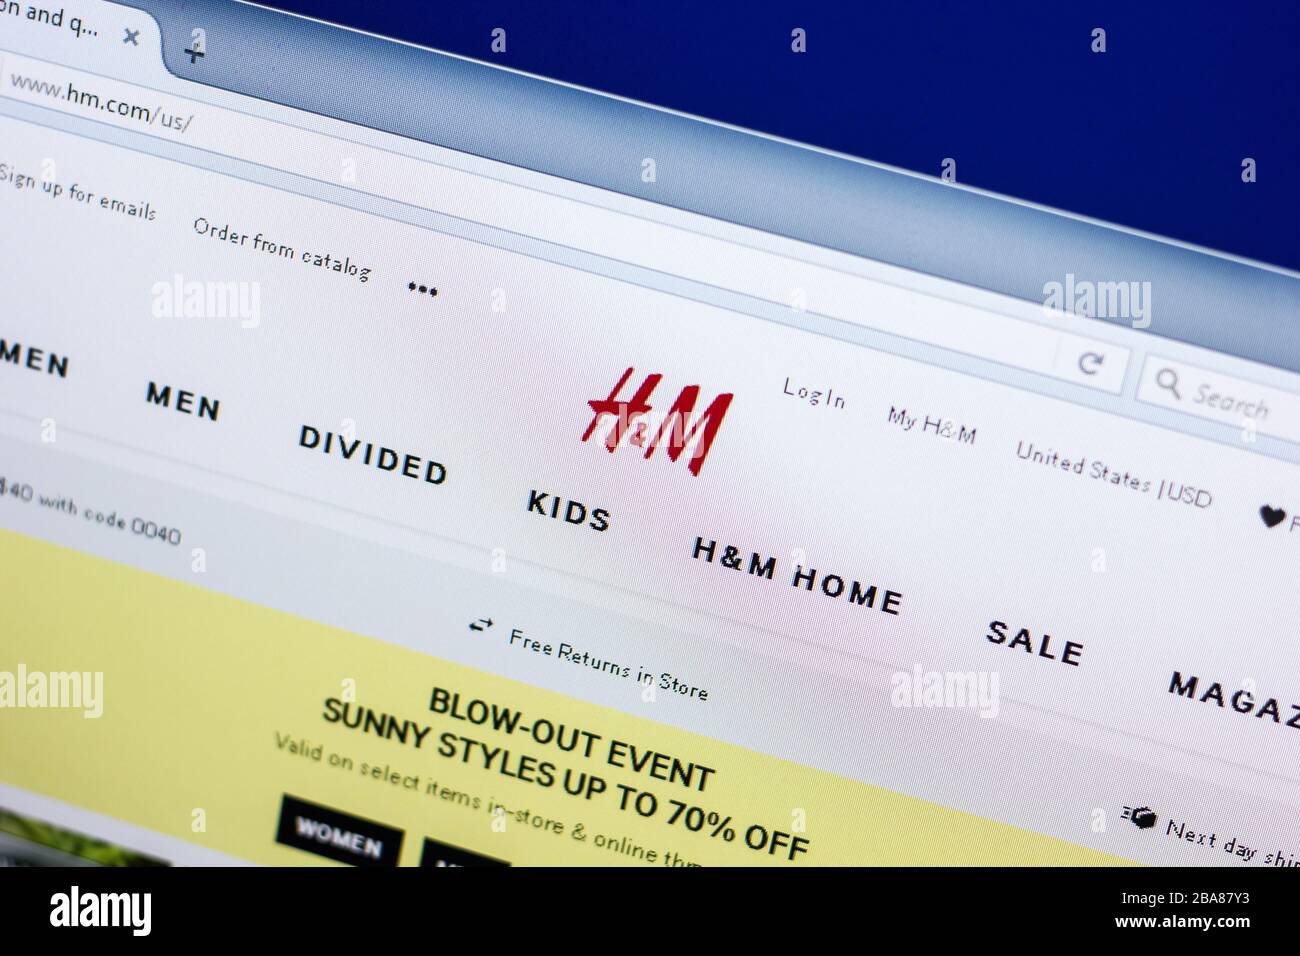 Ryazan, Russia - April 29, 2018: Homepage of H&M website on the display of  PC, url - HM.com Stock Photo - Alamy